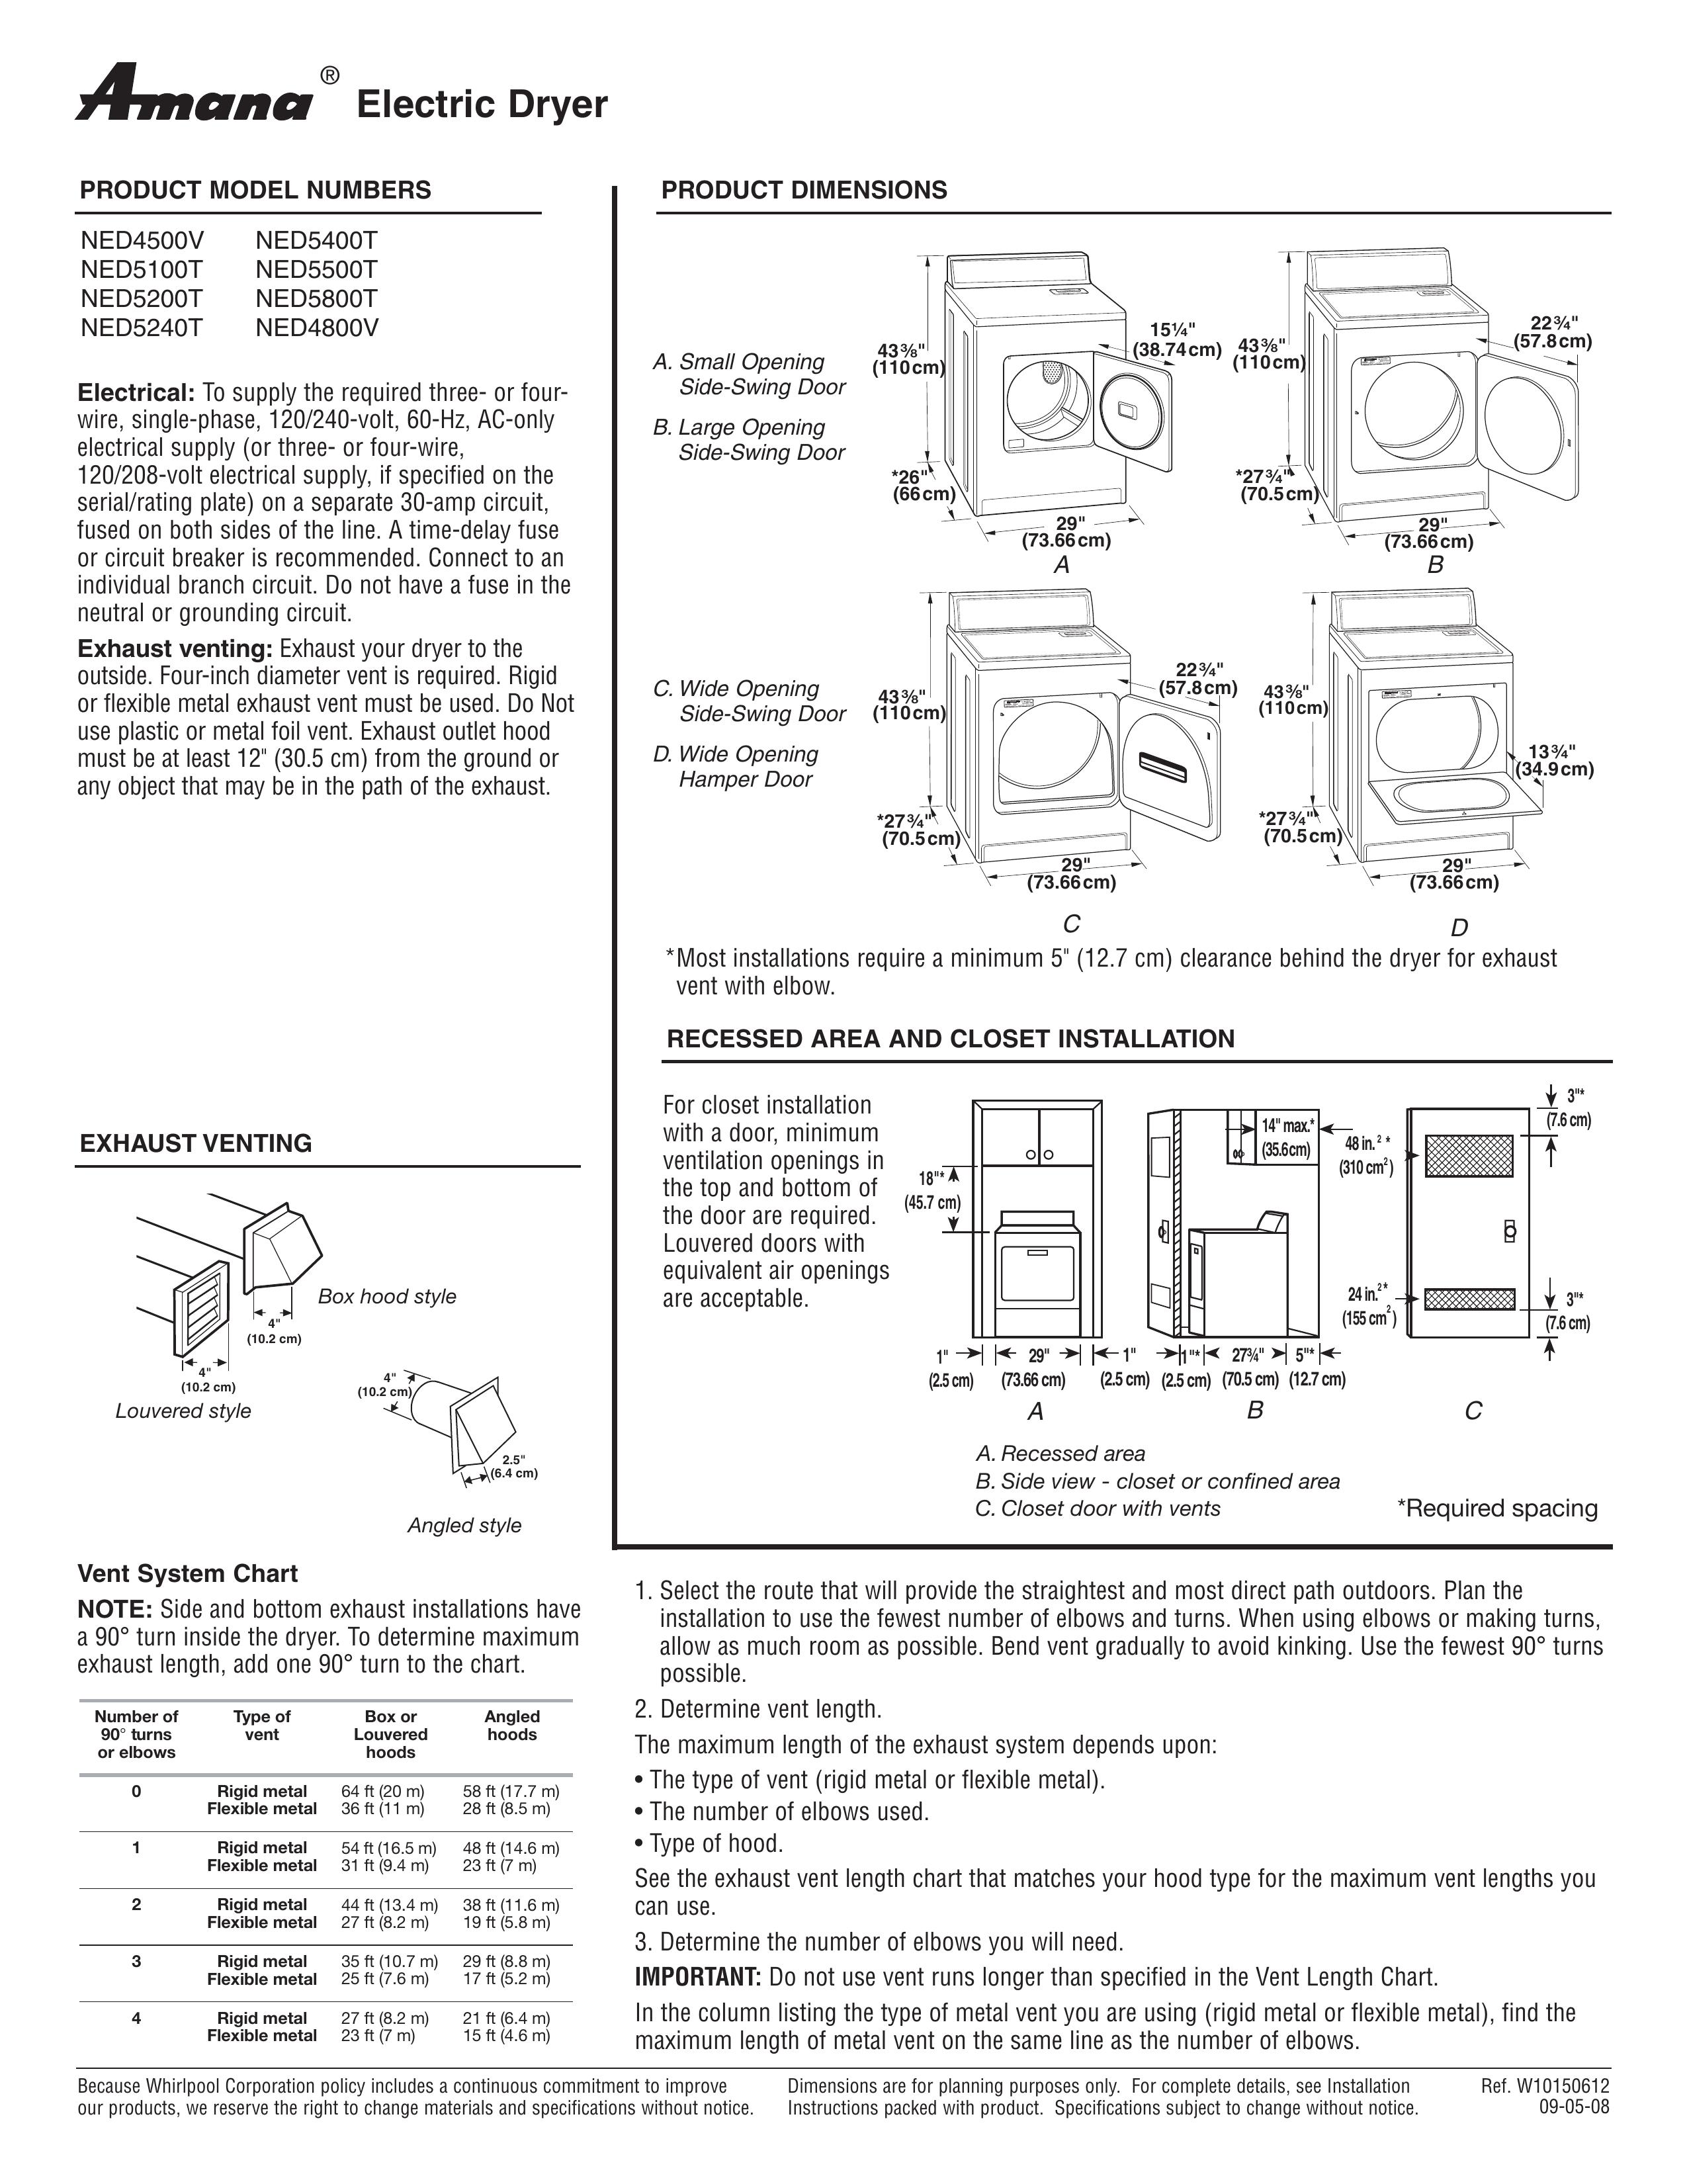 Amana NED5240T Clothes Dryer User Manual